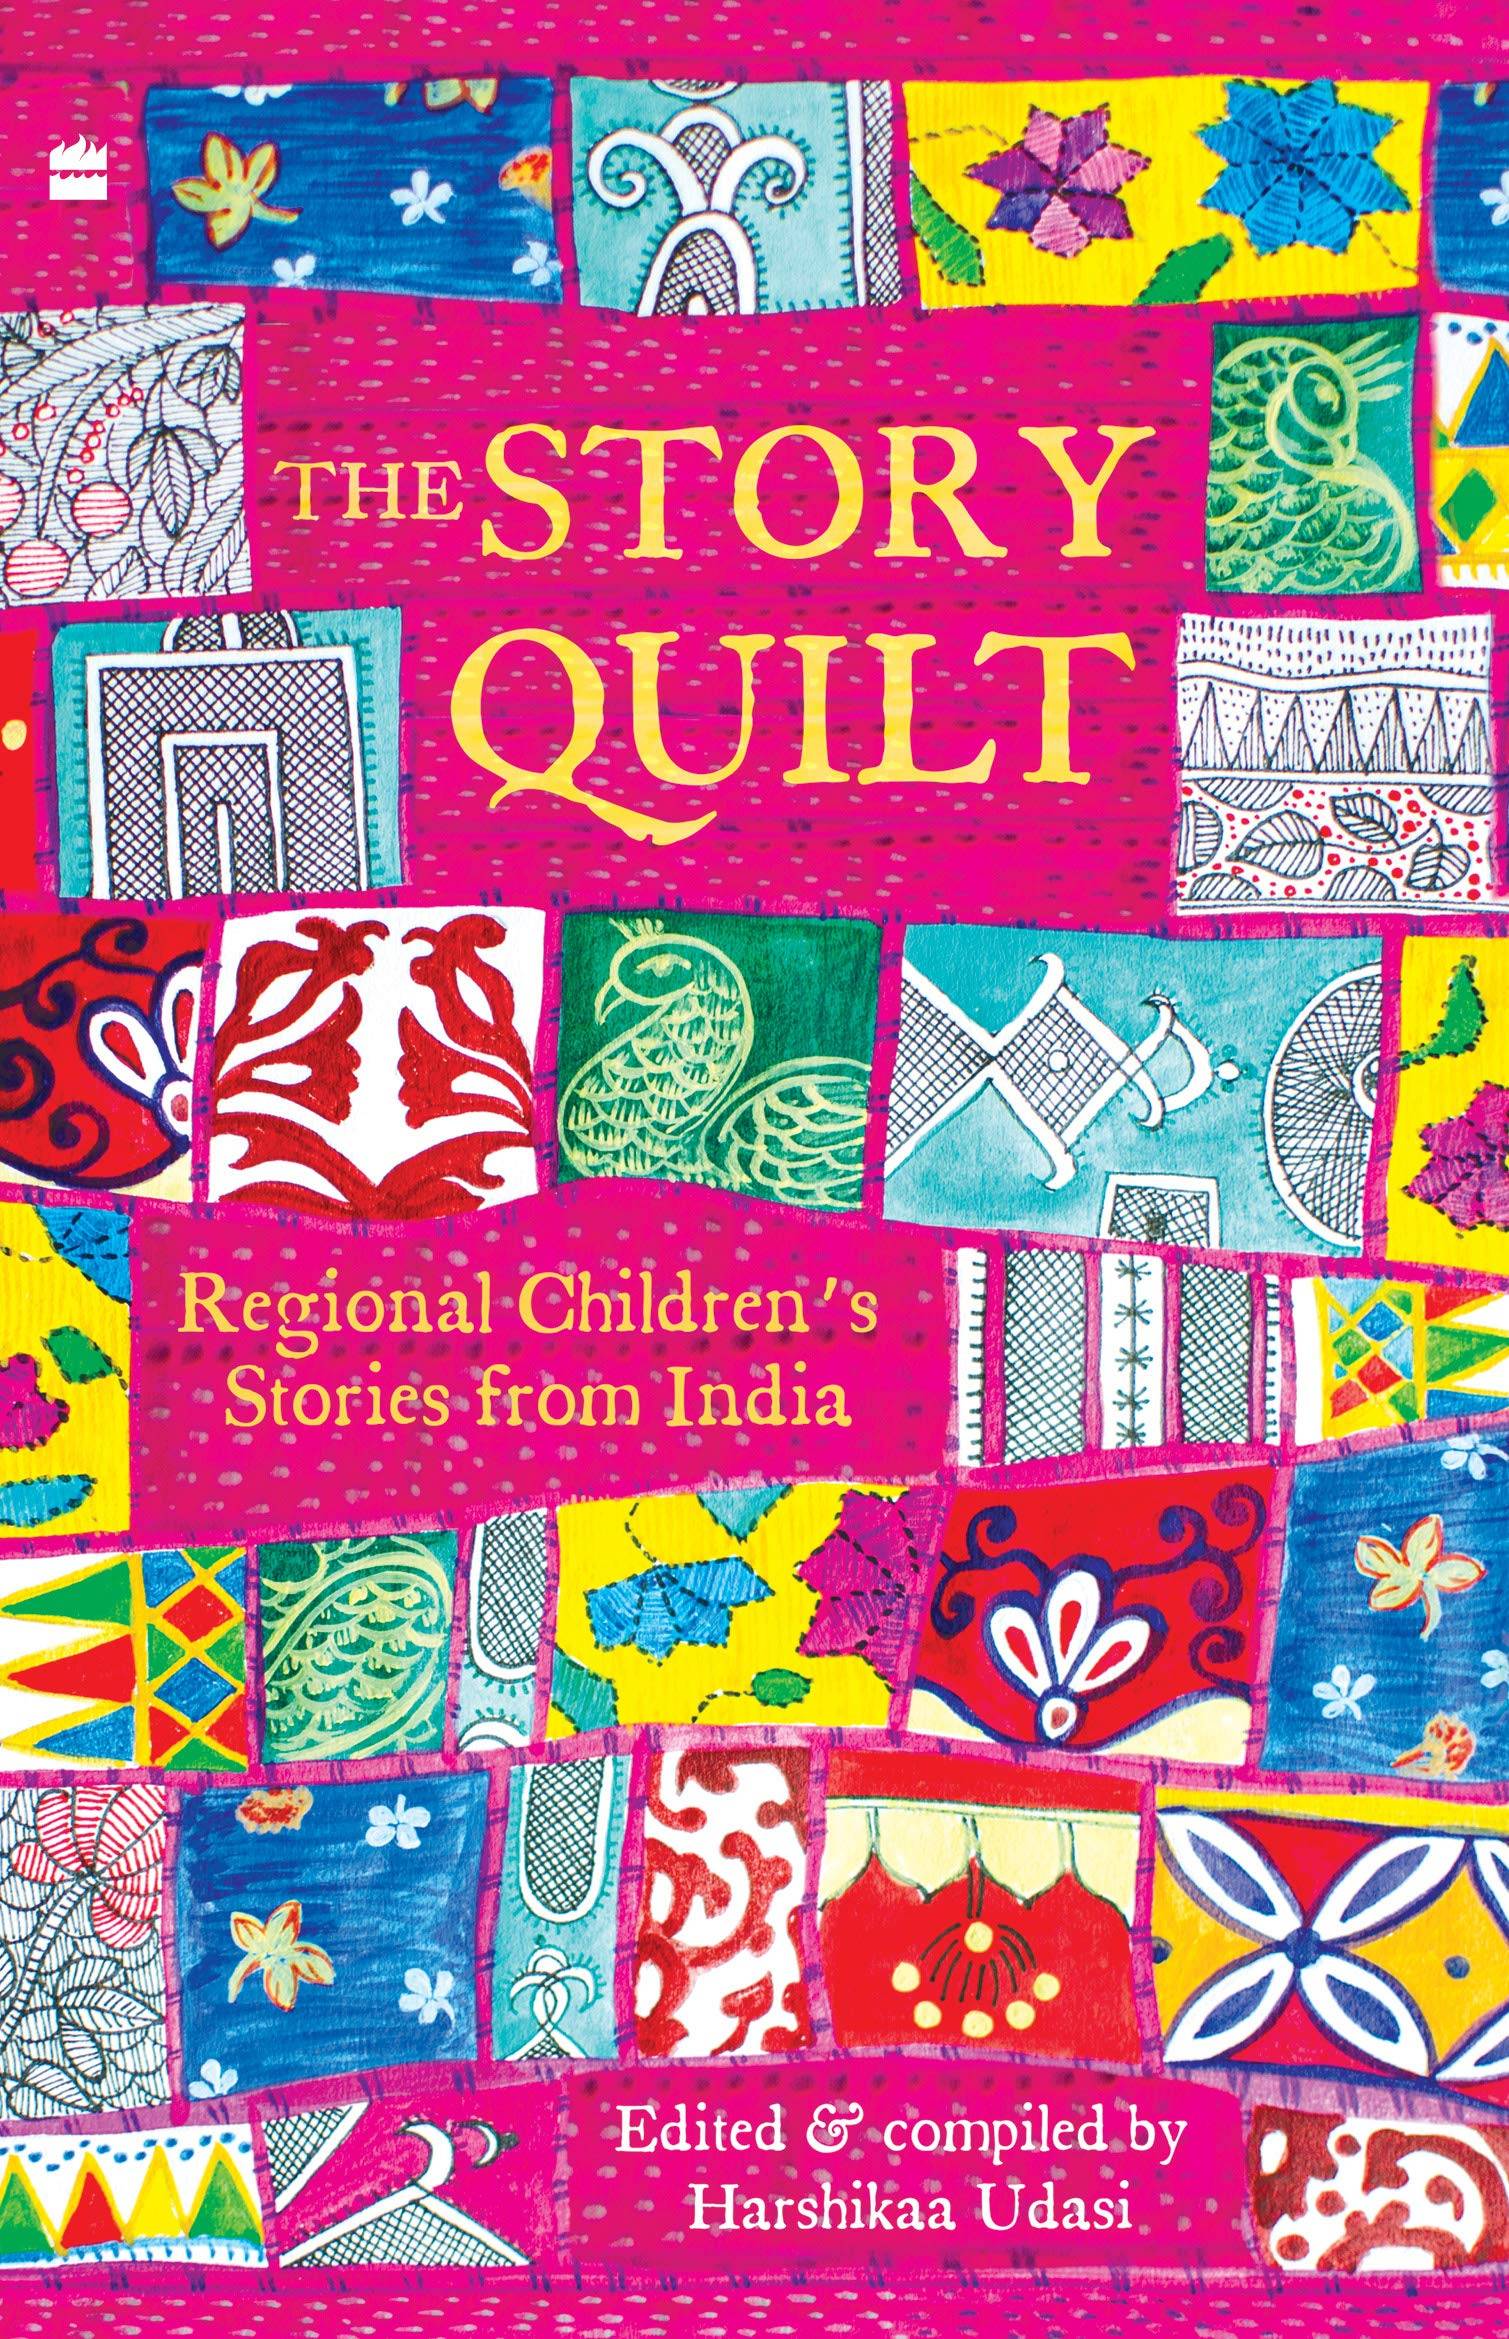 IMG : The Story Quilt- Regional Children's Stories of India